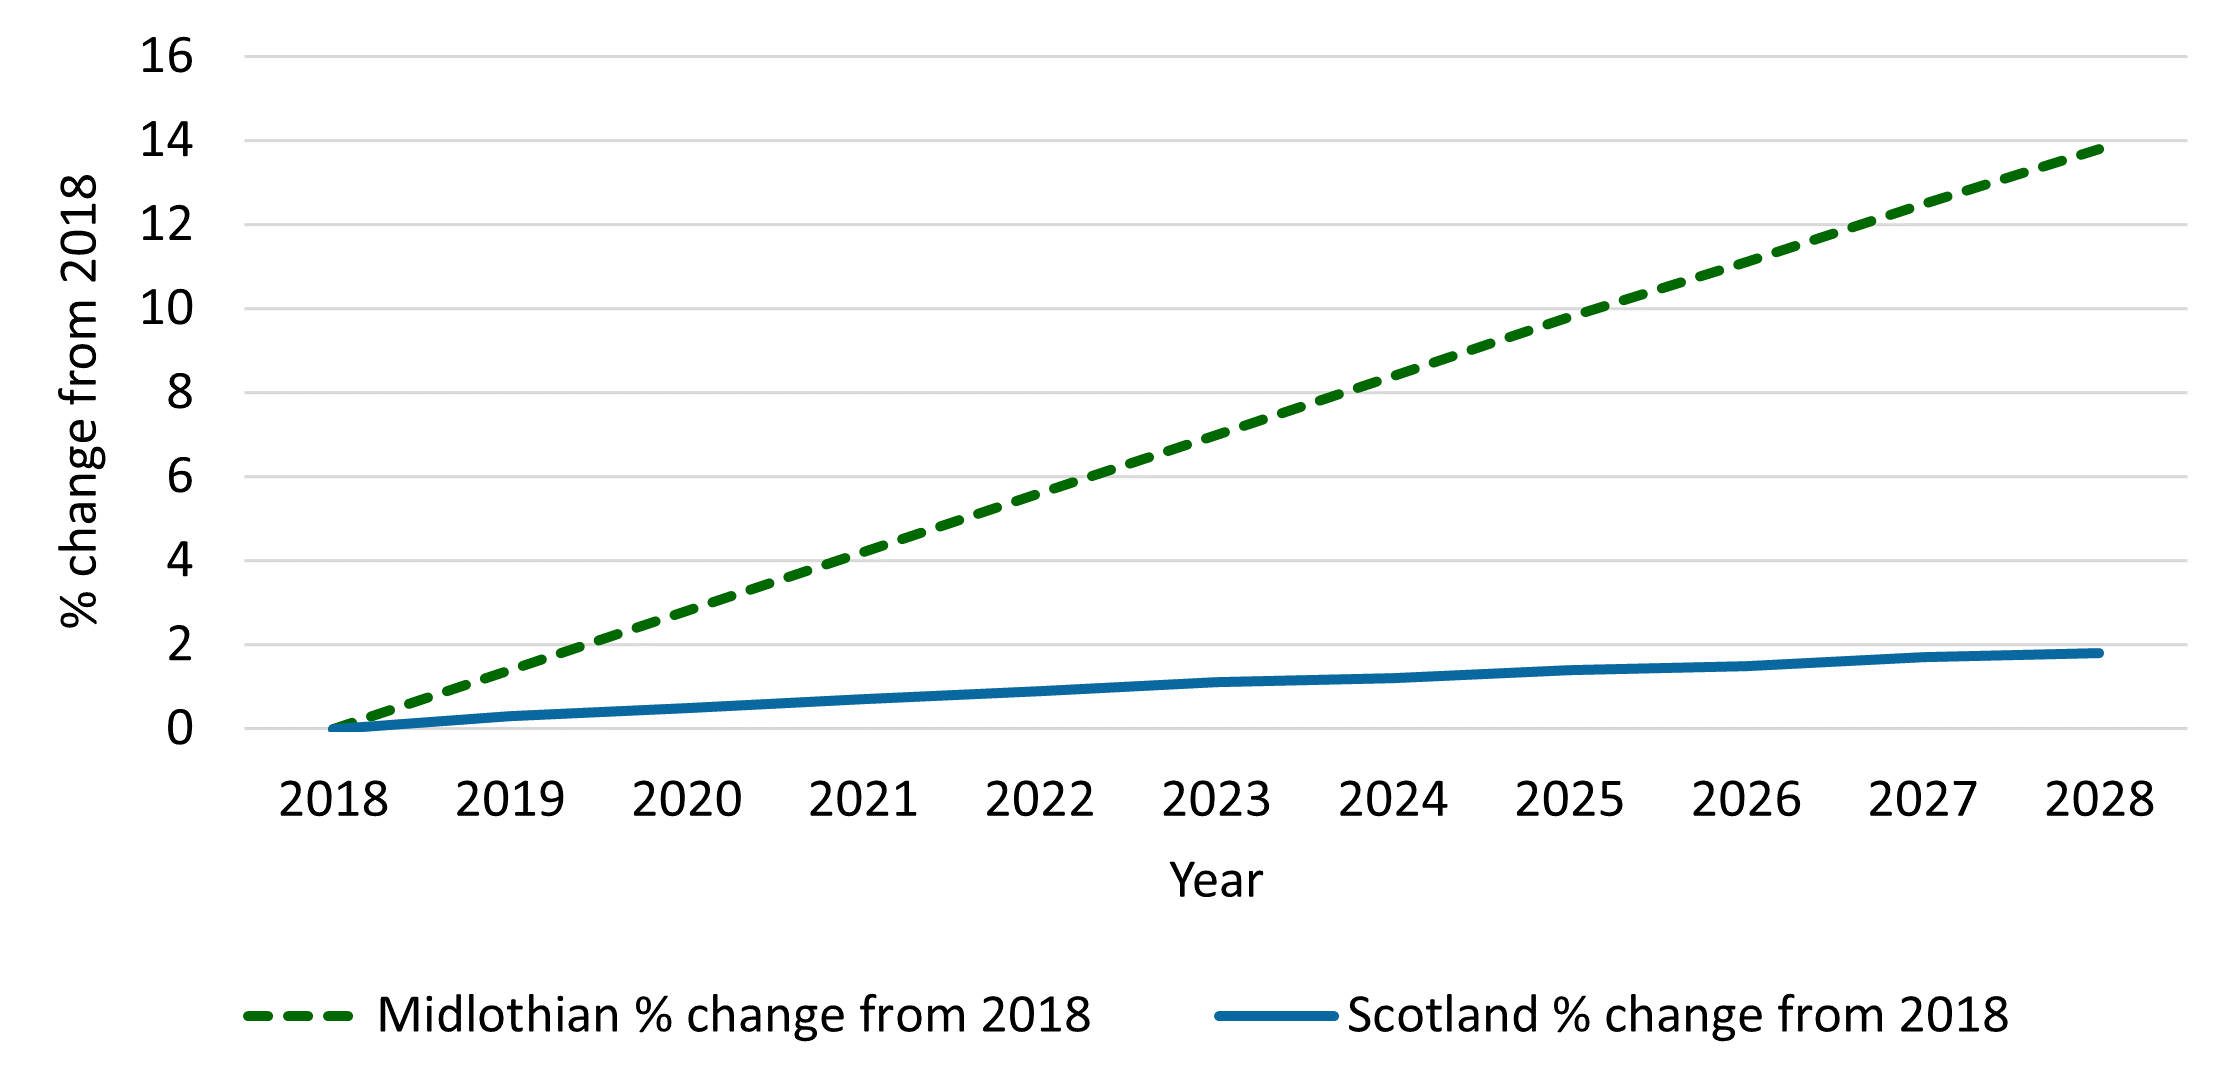 Line graph showing that Midlothian's total projected population percentage change from 2018 is bigger than Scotlands. By 2028 it is predicted to be just under 14% and Scotland's is just under 2%. 